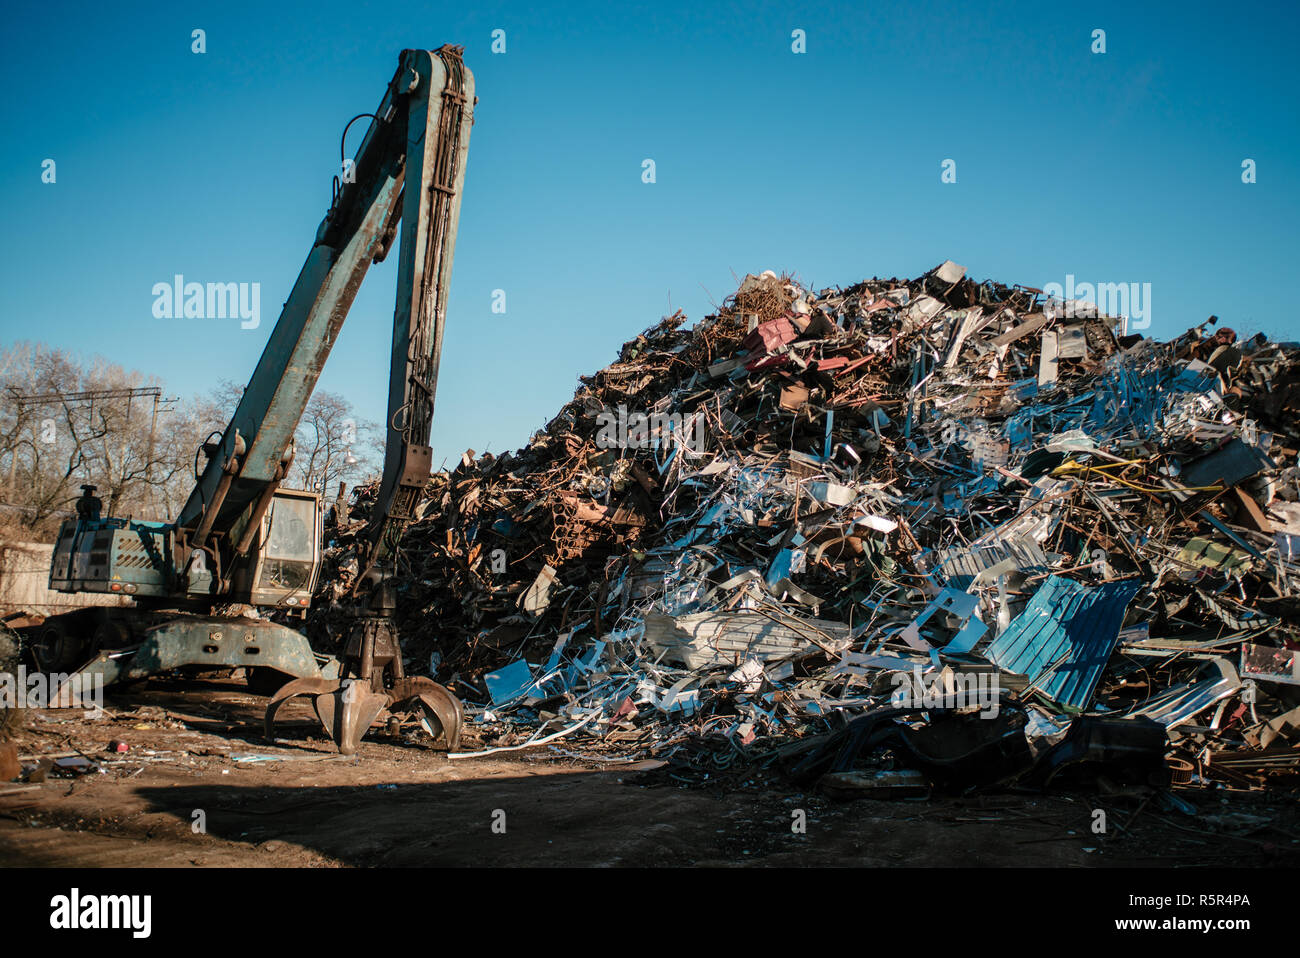 Recycling station. Metal dump with working crane and deep blue sky Stock Photo